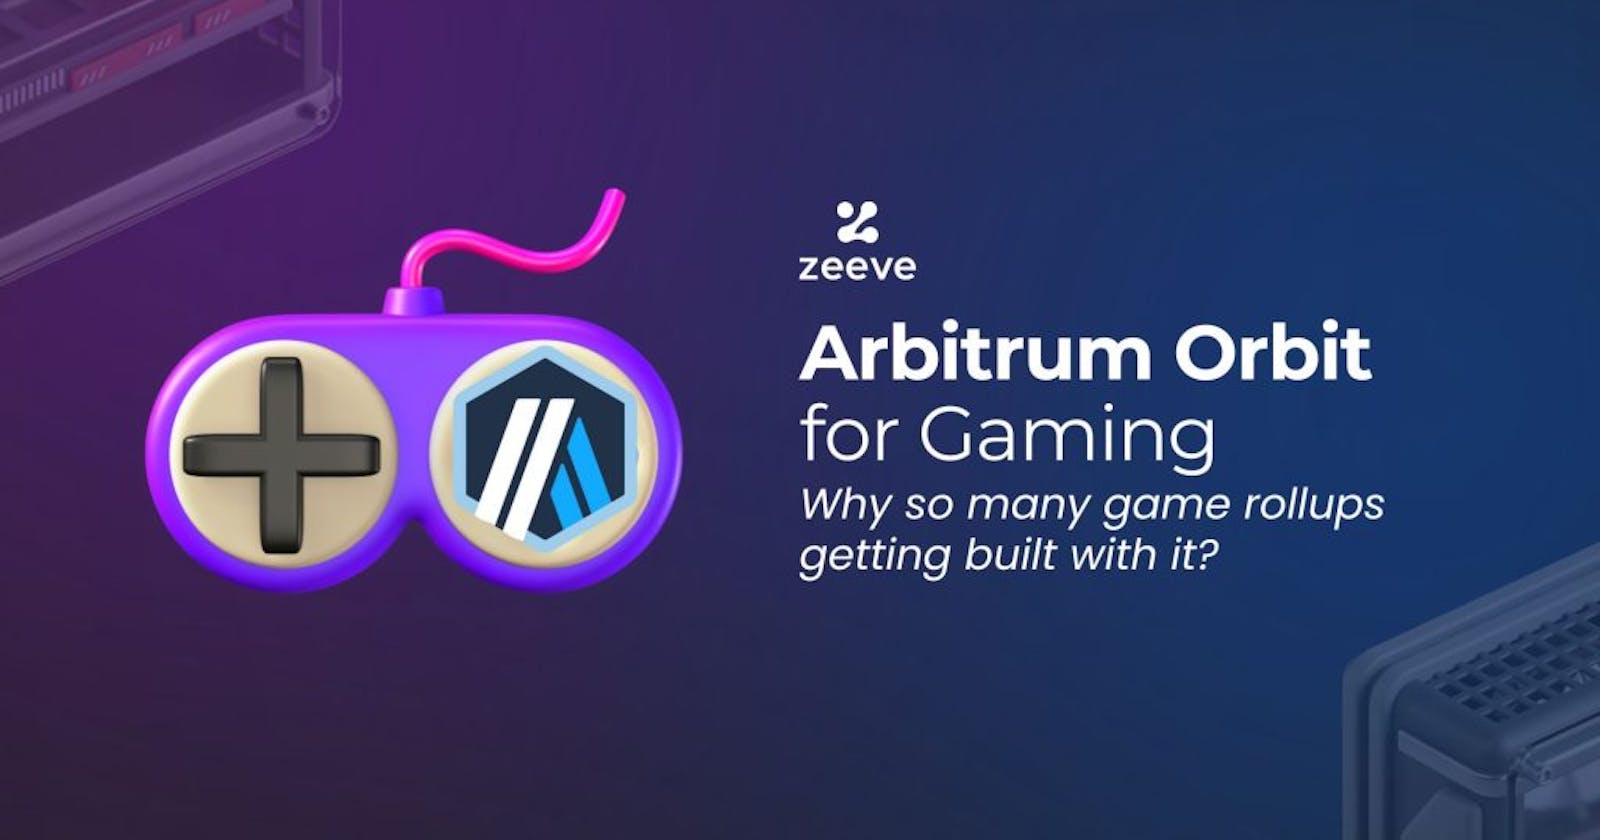 Arbitrum Orbit for gaming: Why are so many game rollups getting built on it?